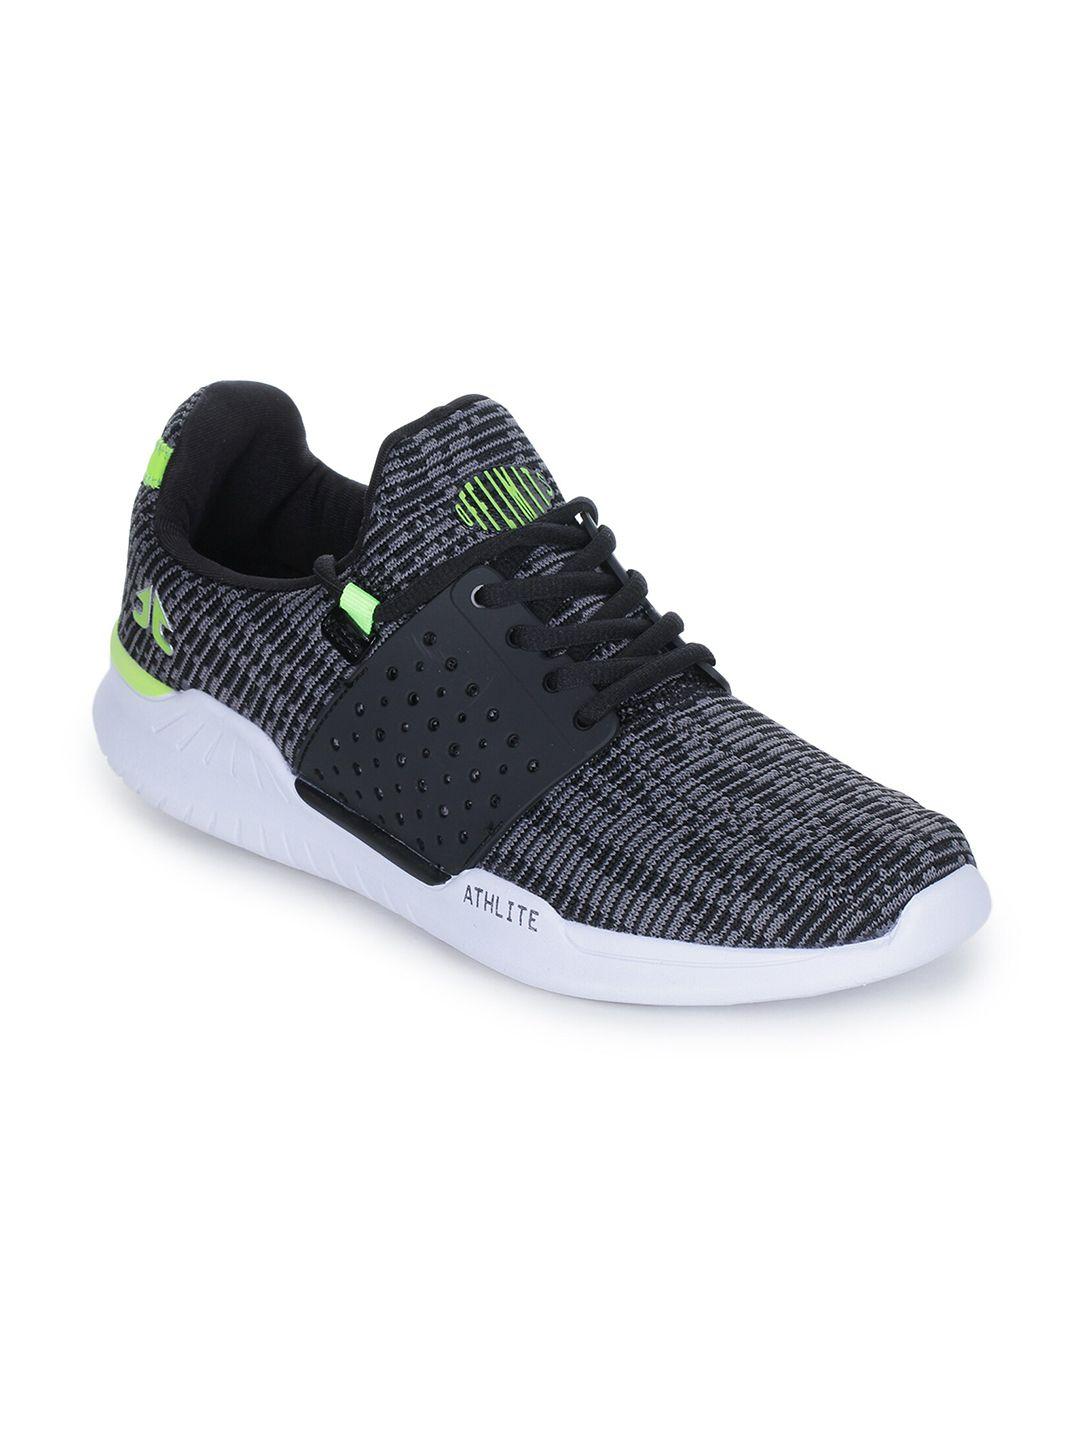 off-limits-men-black-mesh-overcome-running-non-marking-shoes